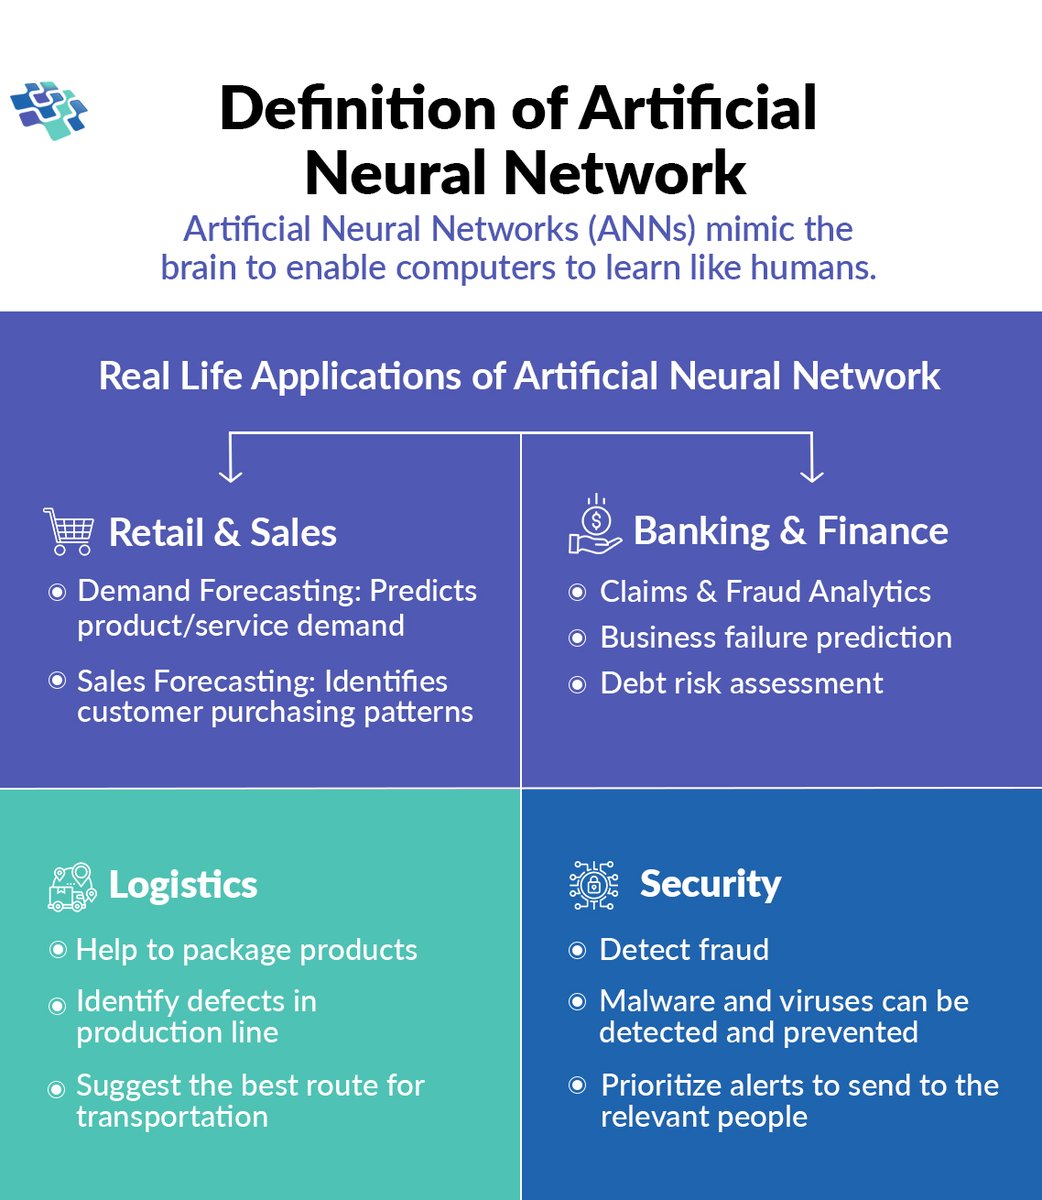 📈 Business growth with Artificial Neural Networks (ANNs) is soaring! Statistics reveal a staggering 270% increase in their use over recent years. 💼💡

#ArtificialNeuralNetworks #BusinessGrowth #Innovation #FraudDetection #Personalization #NextLevelBusiness